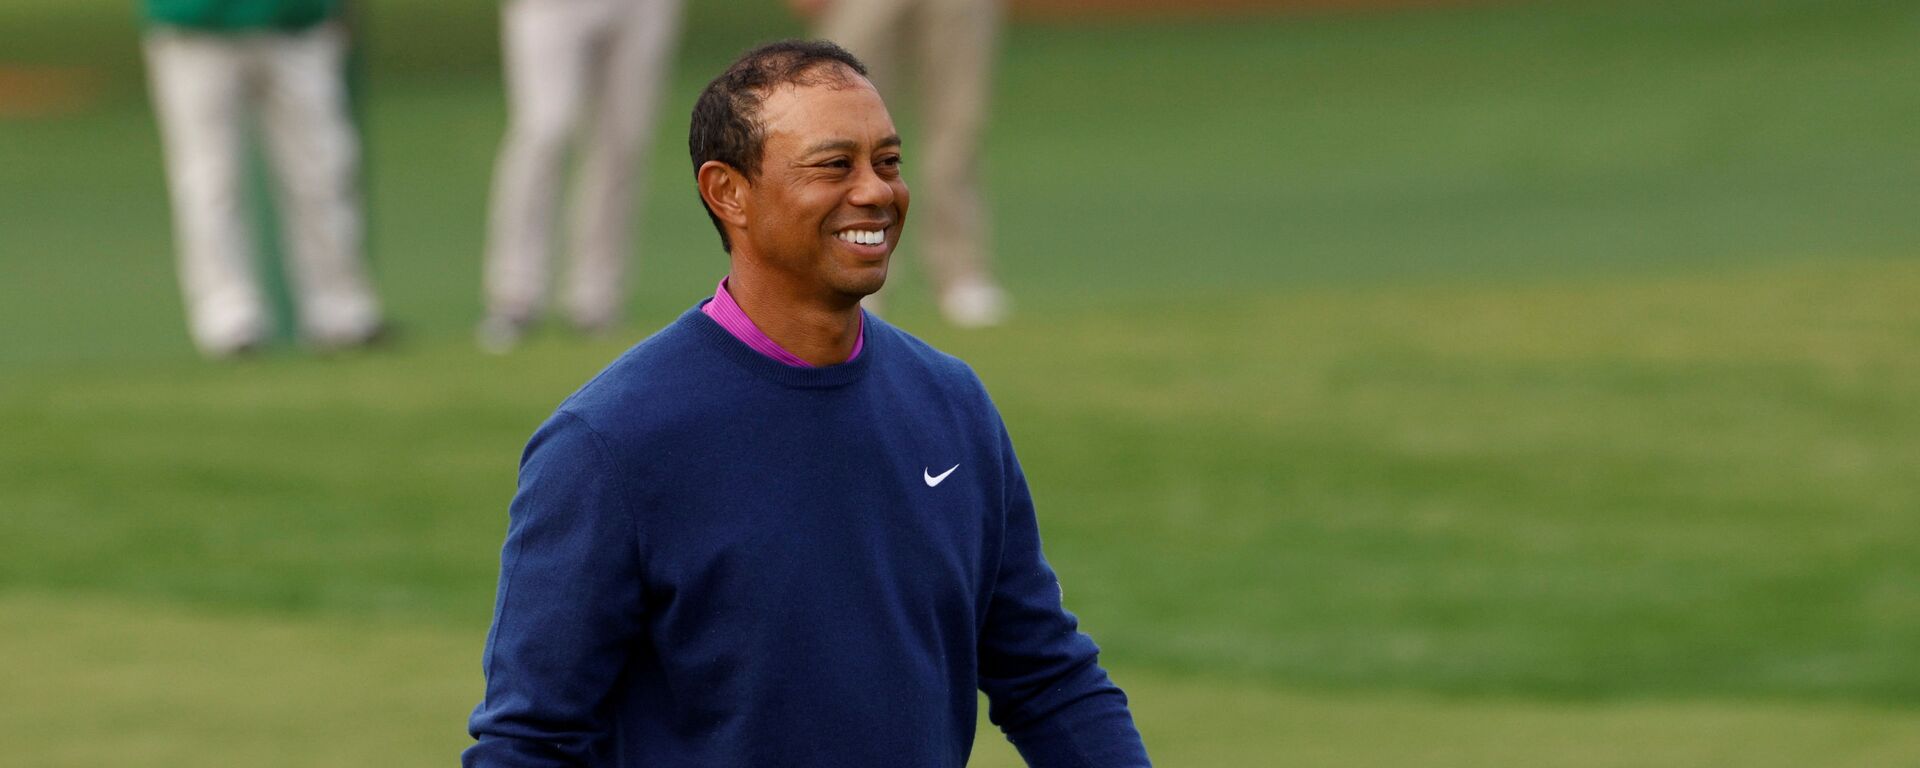 Golf - The Masters - Augusta National Golf Club - Augusta, Georgia, U.S. - November 14, 2020 Tiger woods of the U.S. reacts after completing the second round - Sputnik International, 1920, 01.03.2021